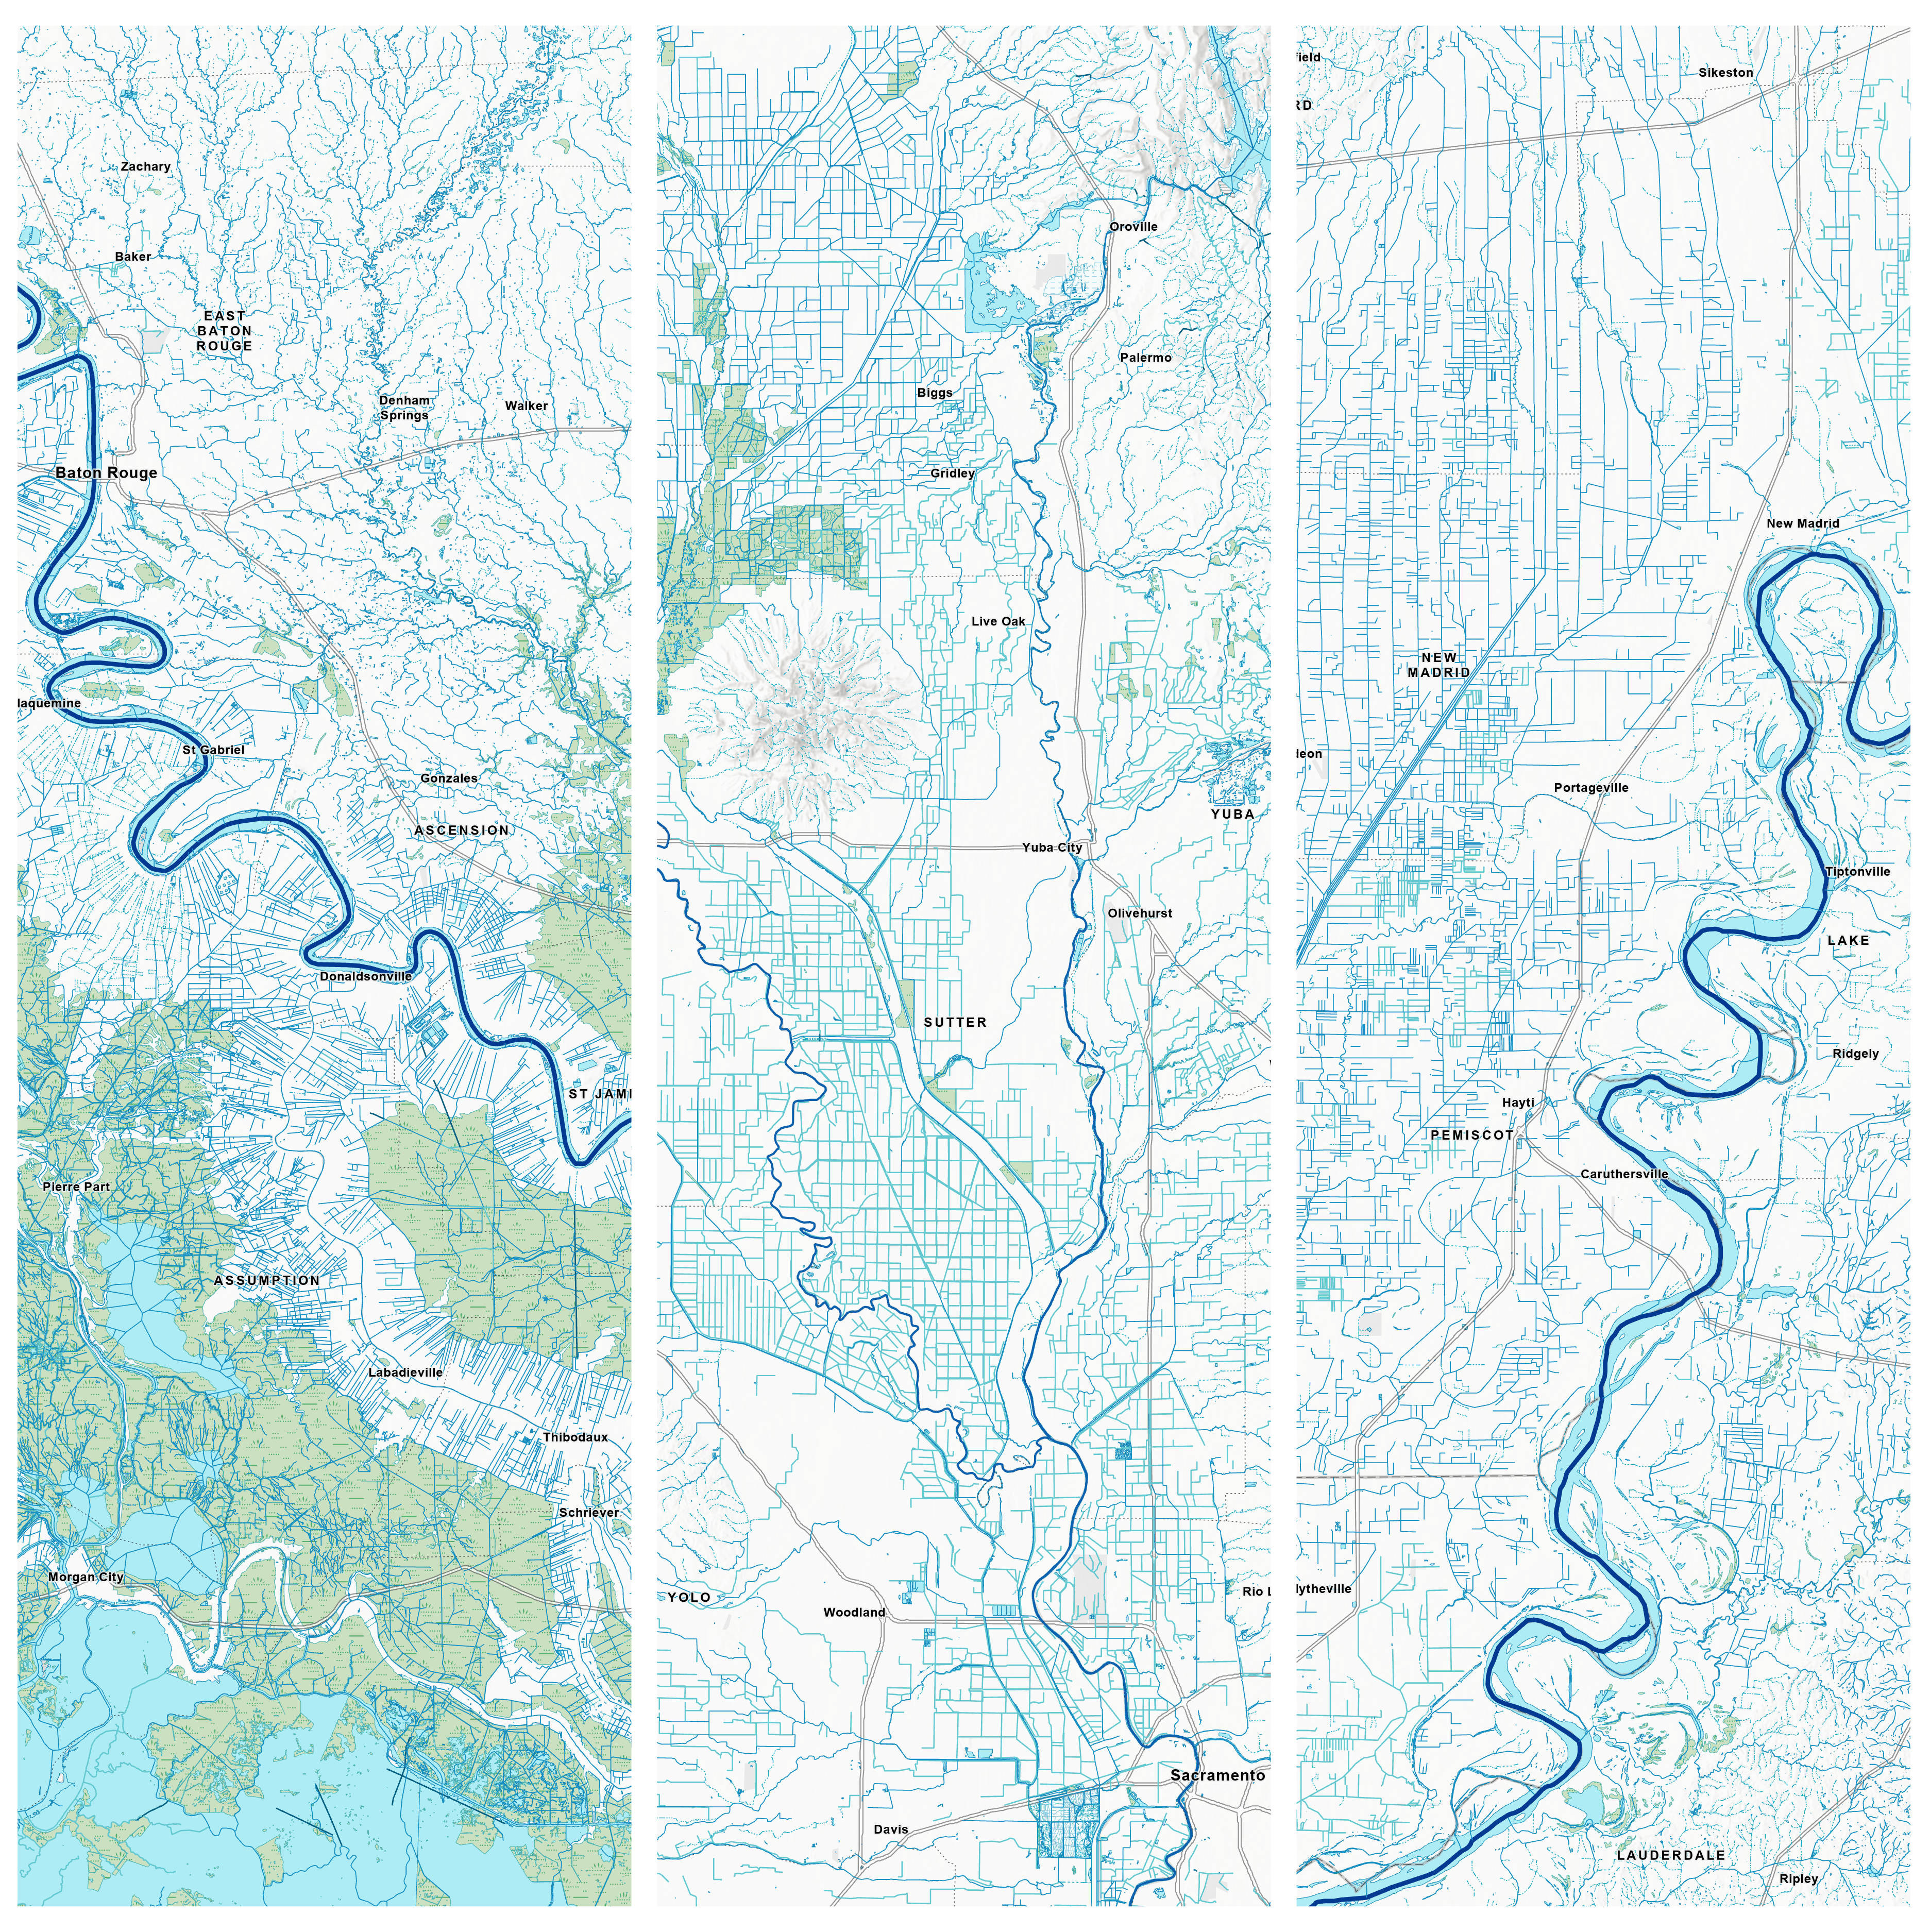 Across the landscape, waterbodies reflect patterns of human development. On the left, the many straight lines reveal extensive engineering to drain lands in southern Louisiana while similar straight lines in the center map show the extensive irrigation systems that support the rich agricultural lands in California's central valley. On the right, we see similar water systems that support agriculture along the Mississippi River in southeastern Missouri.